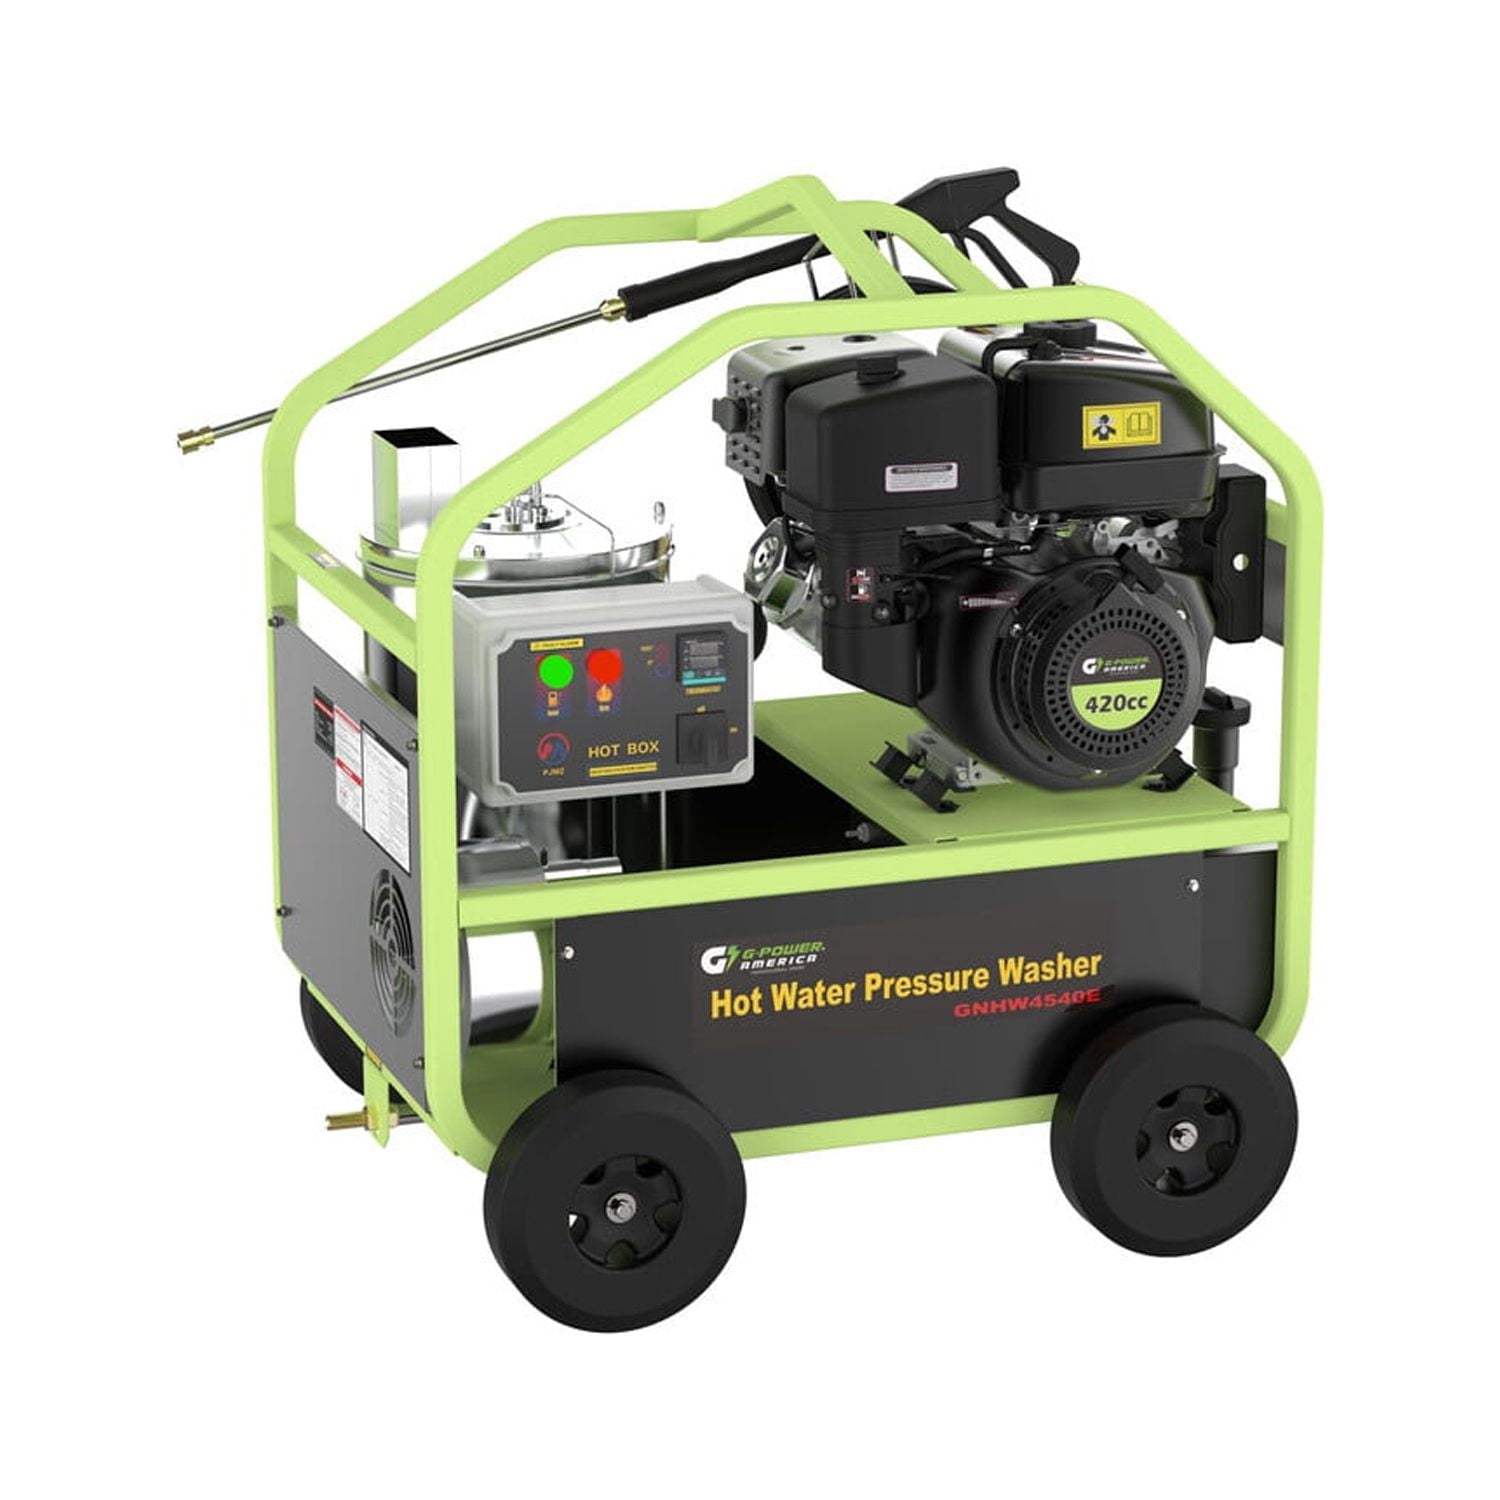 DELUX ® RK40-C Series Gas-Powered Hot Water Pressure Washer